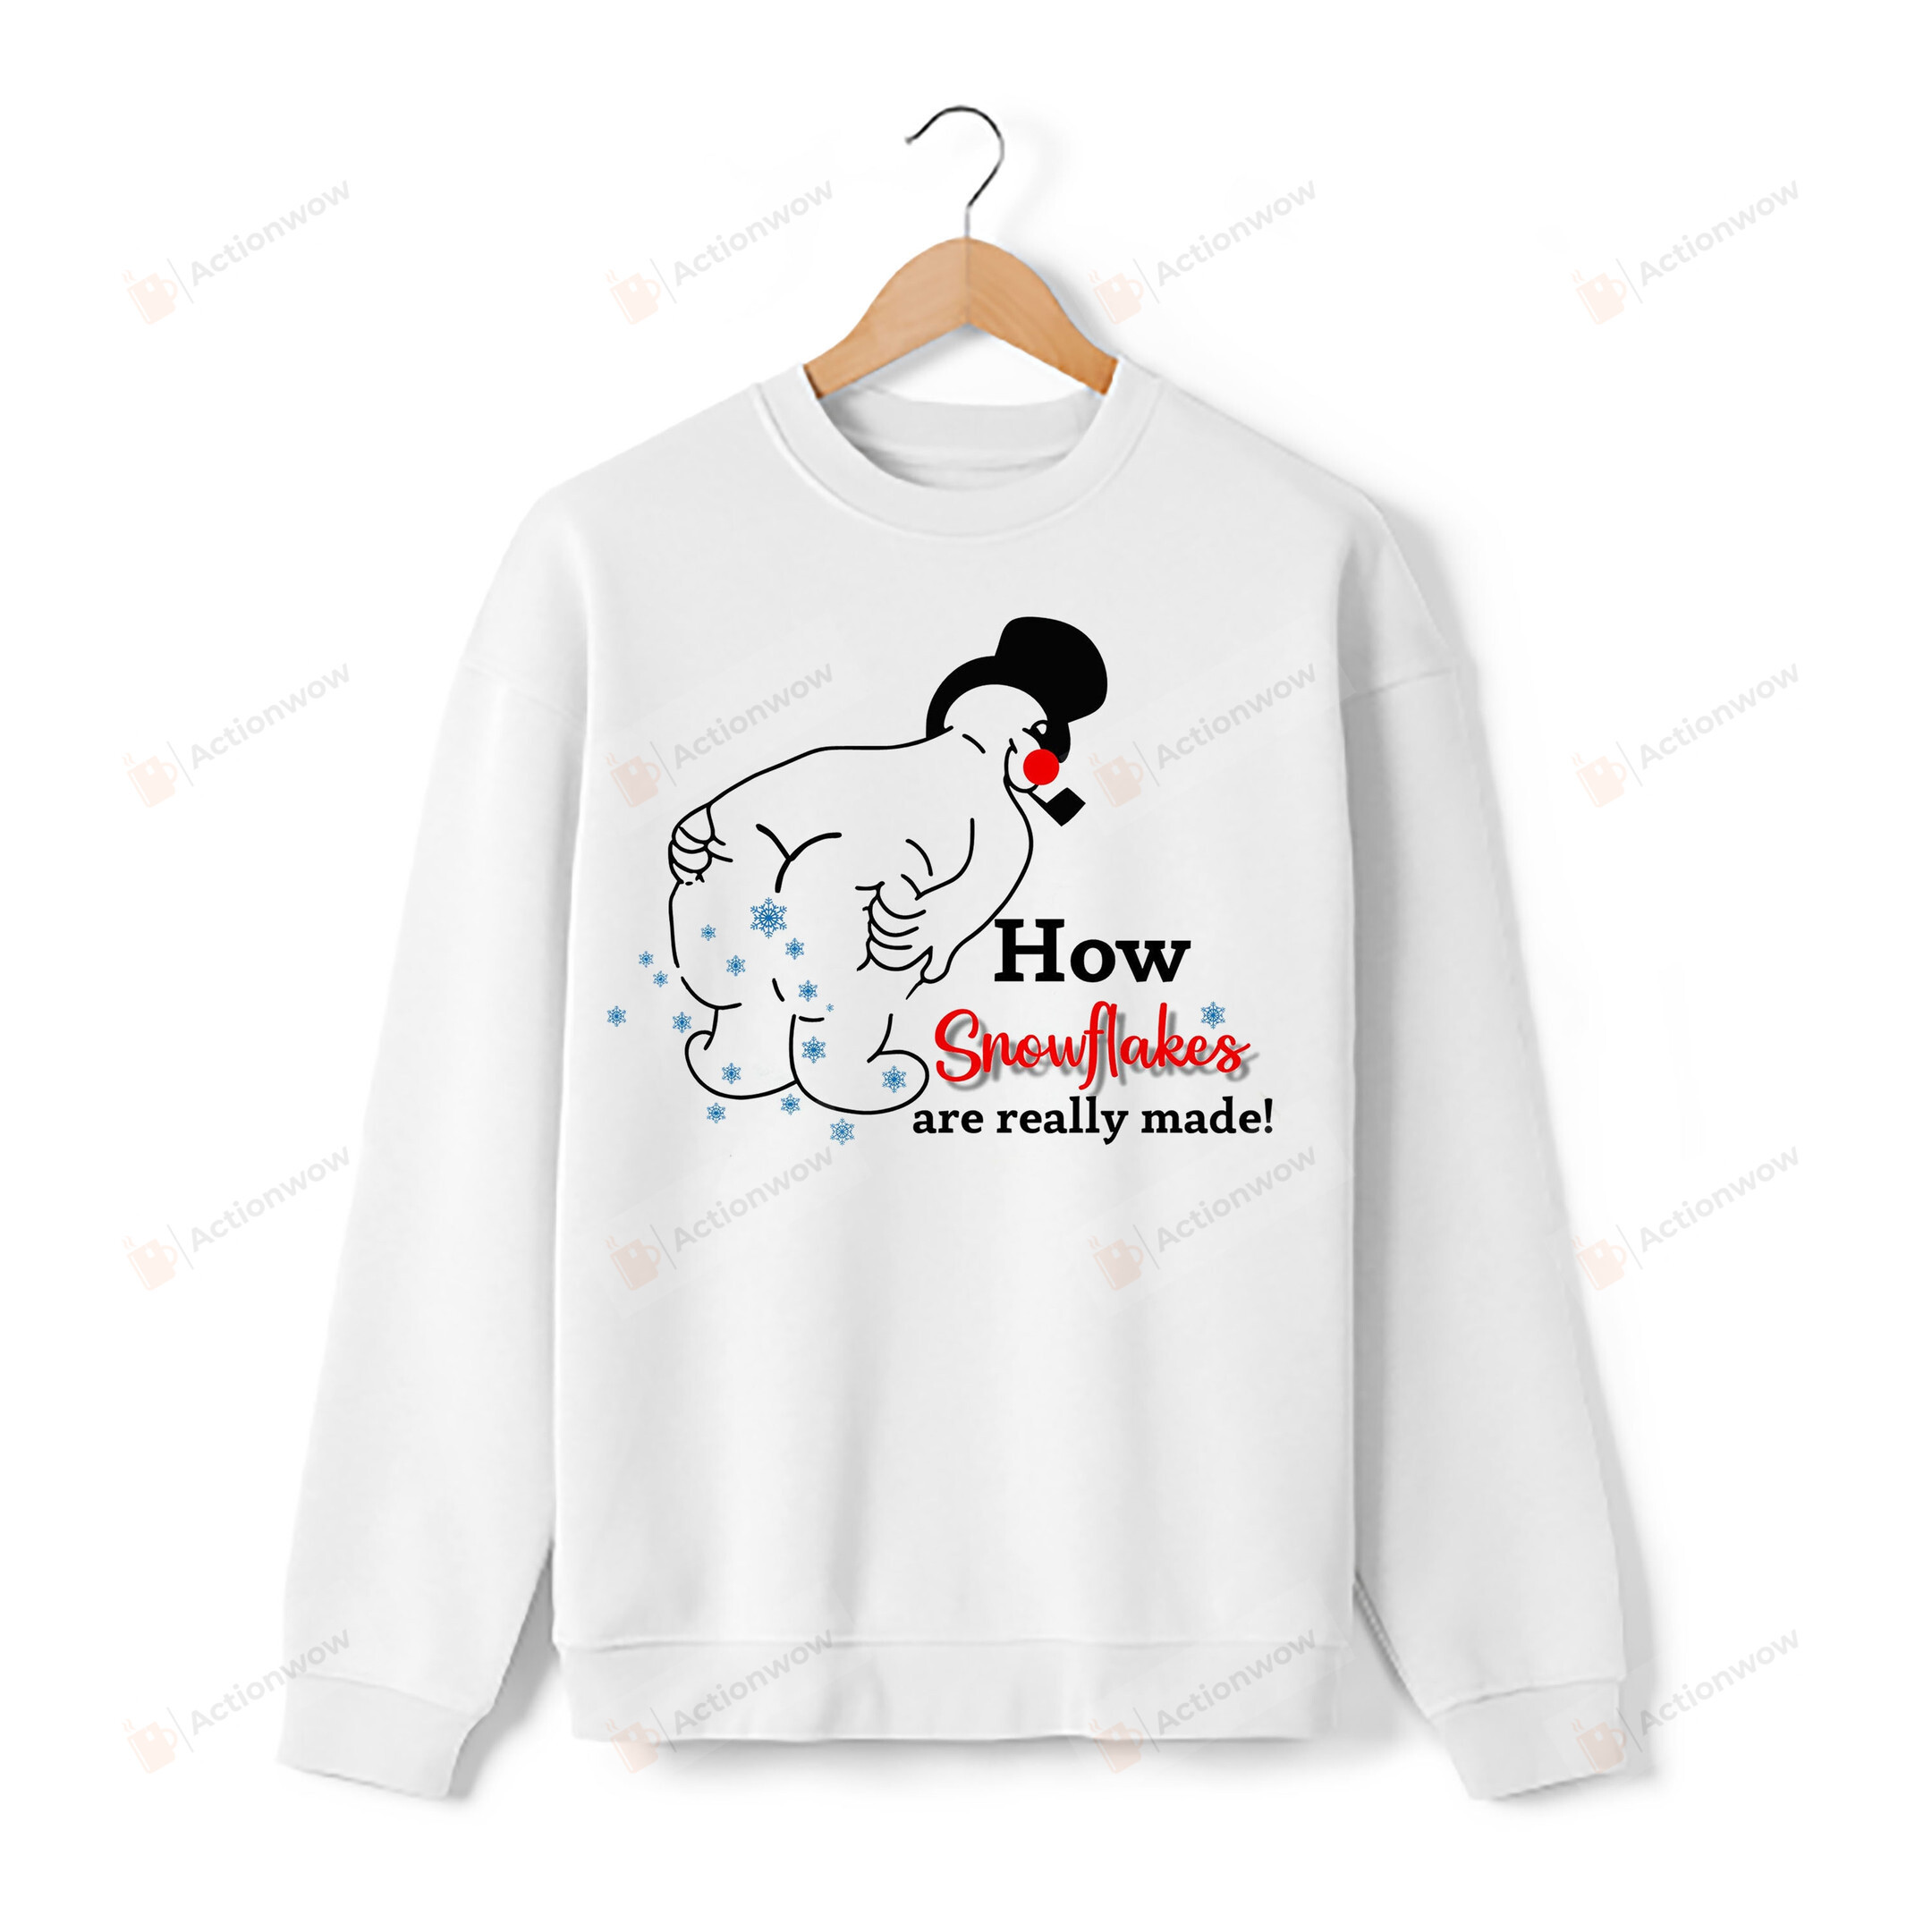 How Snowflake Are Really Made Sweatshirt, Funny Snowman Shirt, Funny Christmas Sweaters For Women